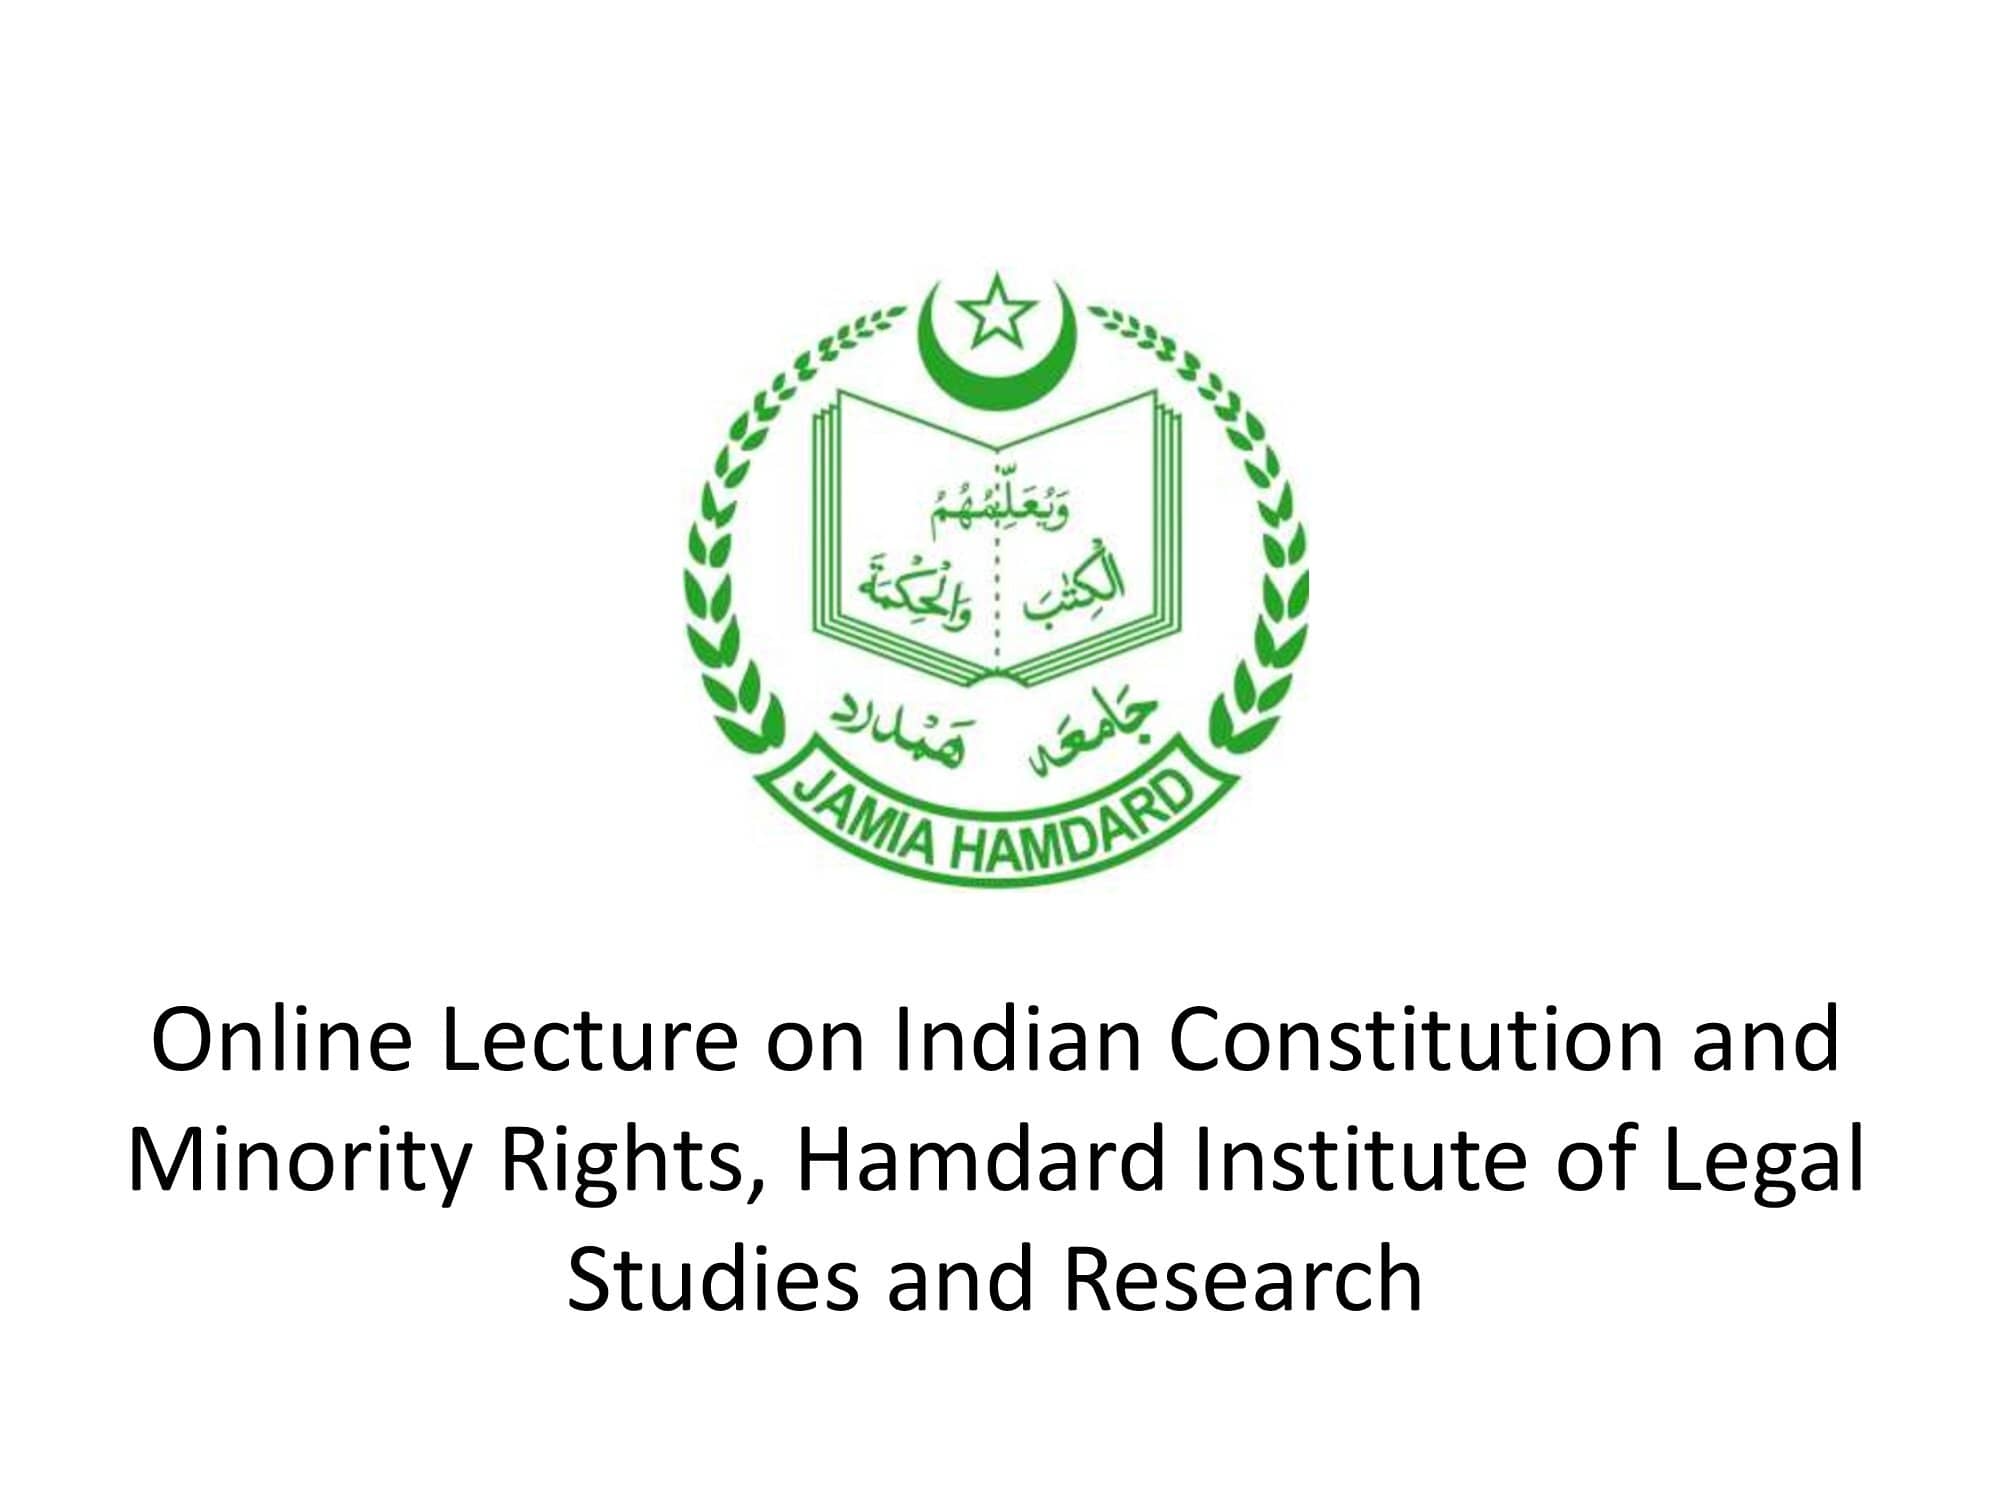 Online Lecture on Indian Constitution and Minority Rights, Hamdard Institute of Legal Studies and Research